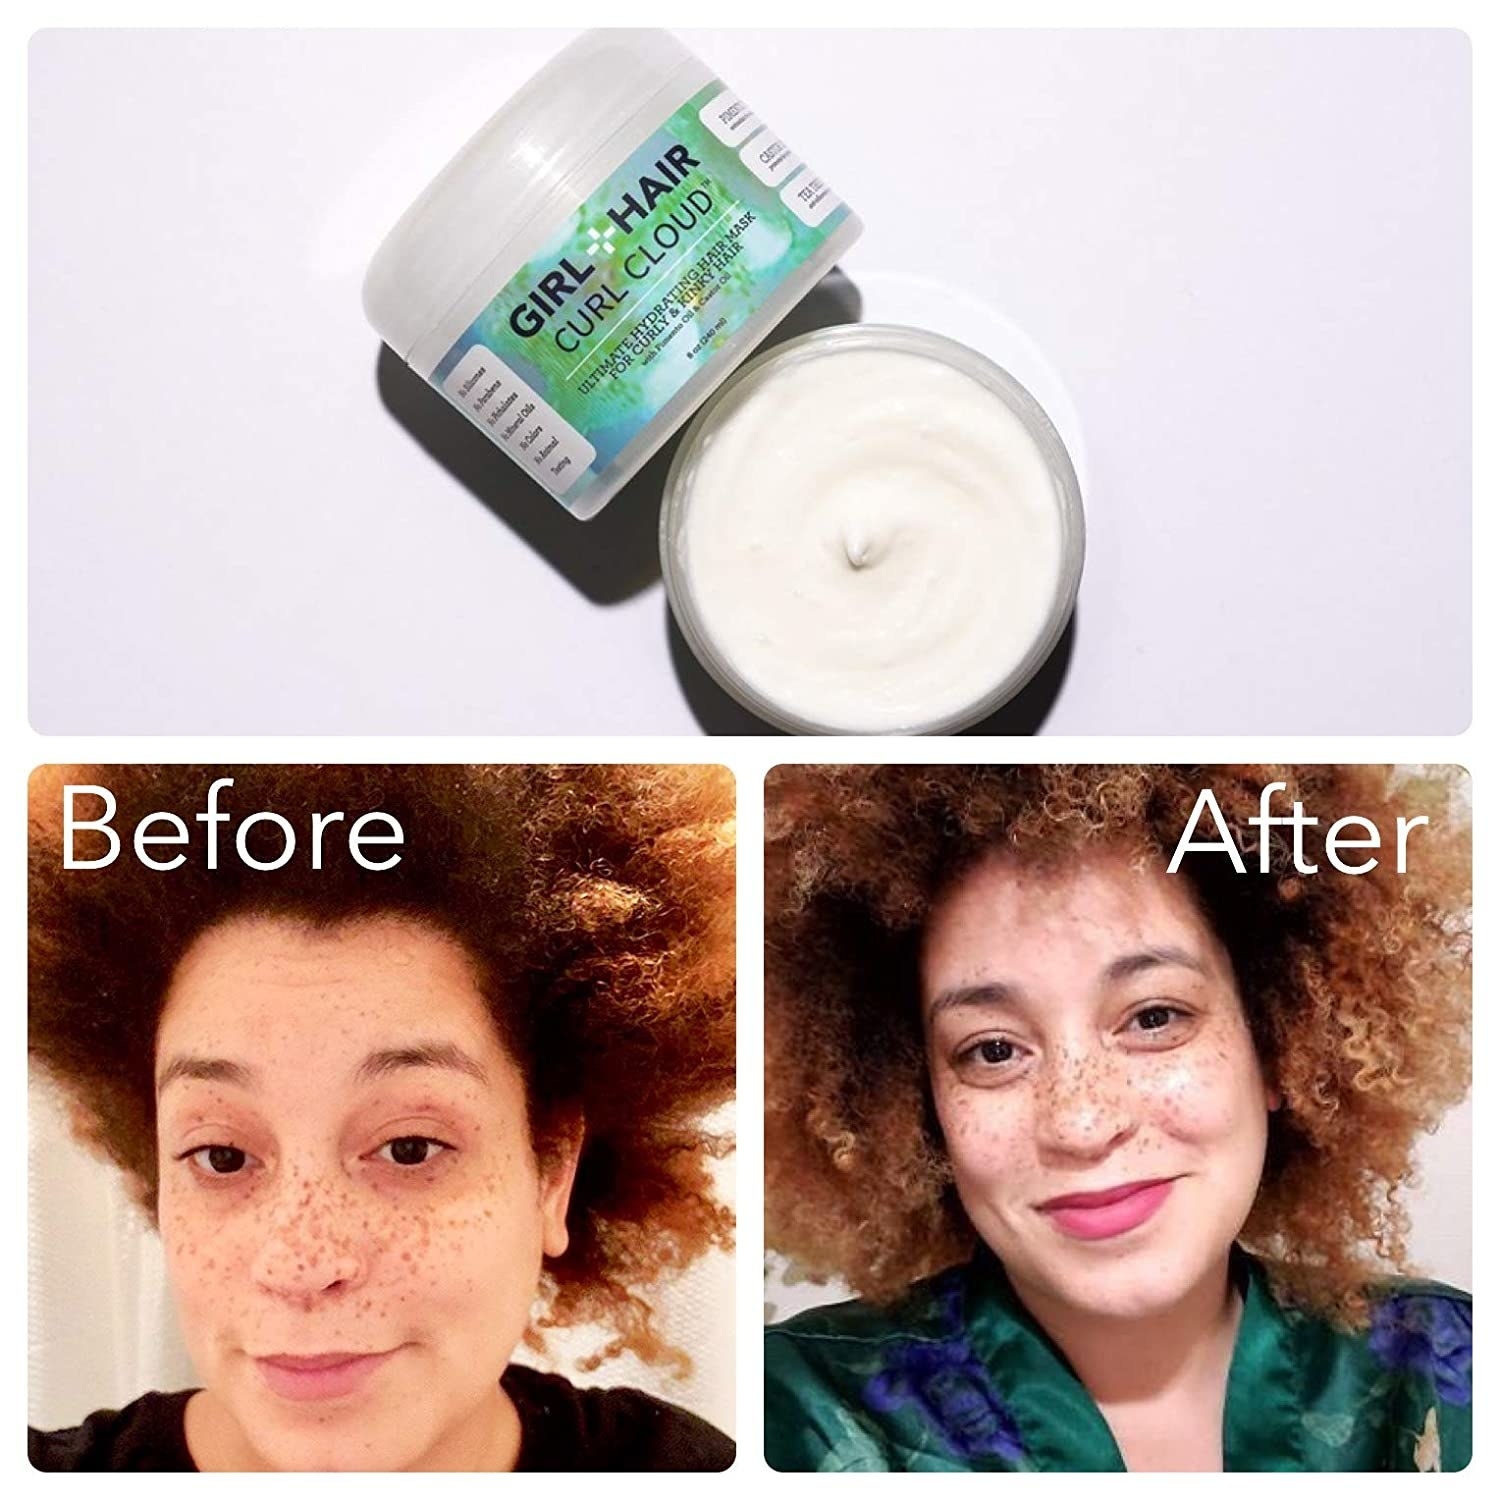 product on the top, before photo on the bottom with frizzy curly hair and an after photo of defined hair after using the hair mask